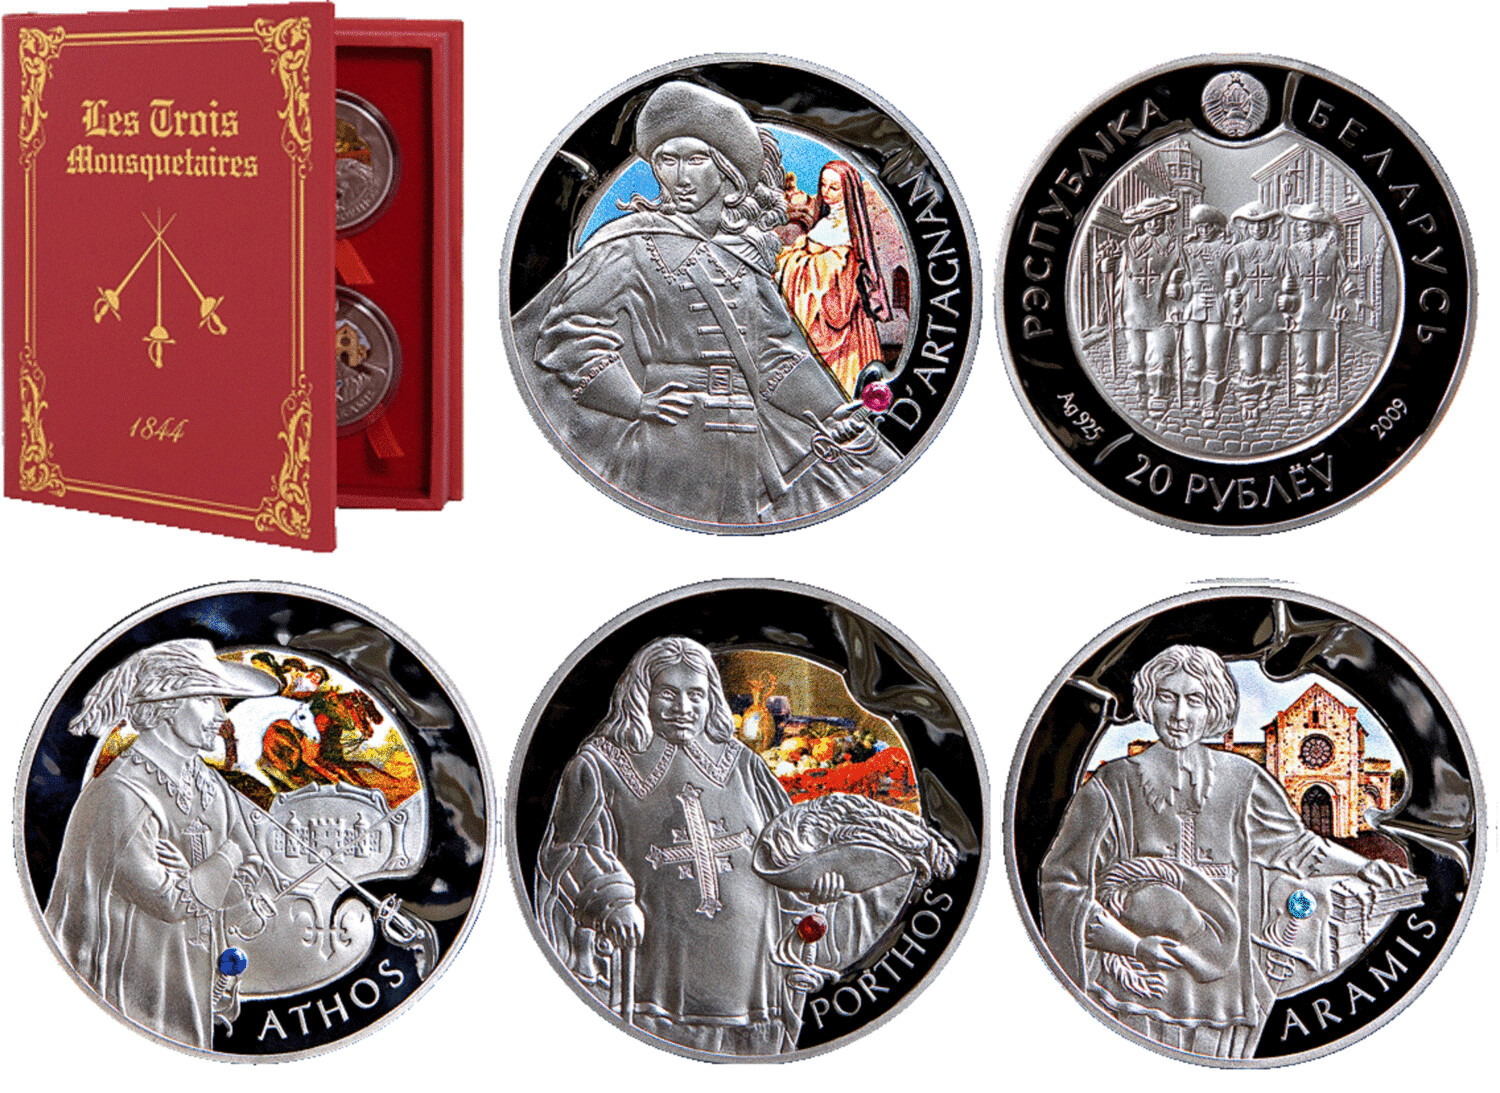 Belarus. 2009. A set of 4 coins of 20 Rubles. Three Musketeers. 0.925 Silver. 3.3645 Oz., ASW. 28.28 g × 4. PROOF / Colored. Mintage: 5,000